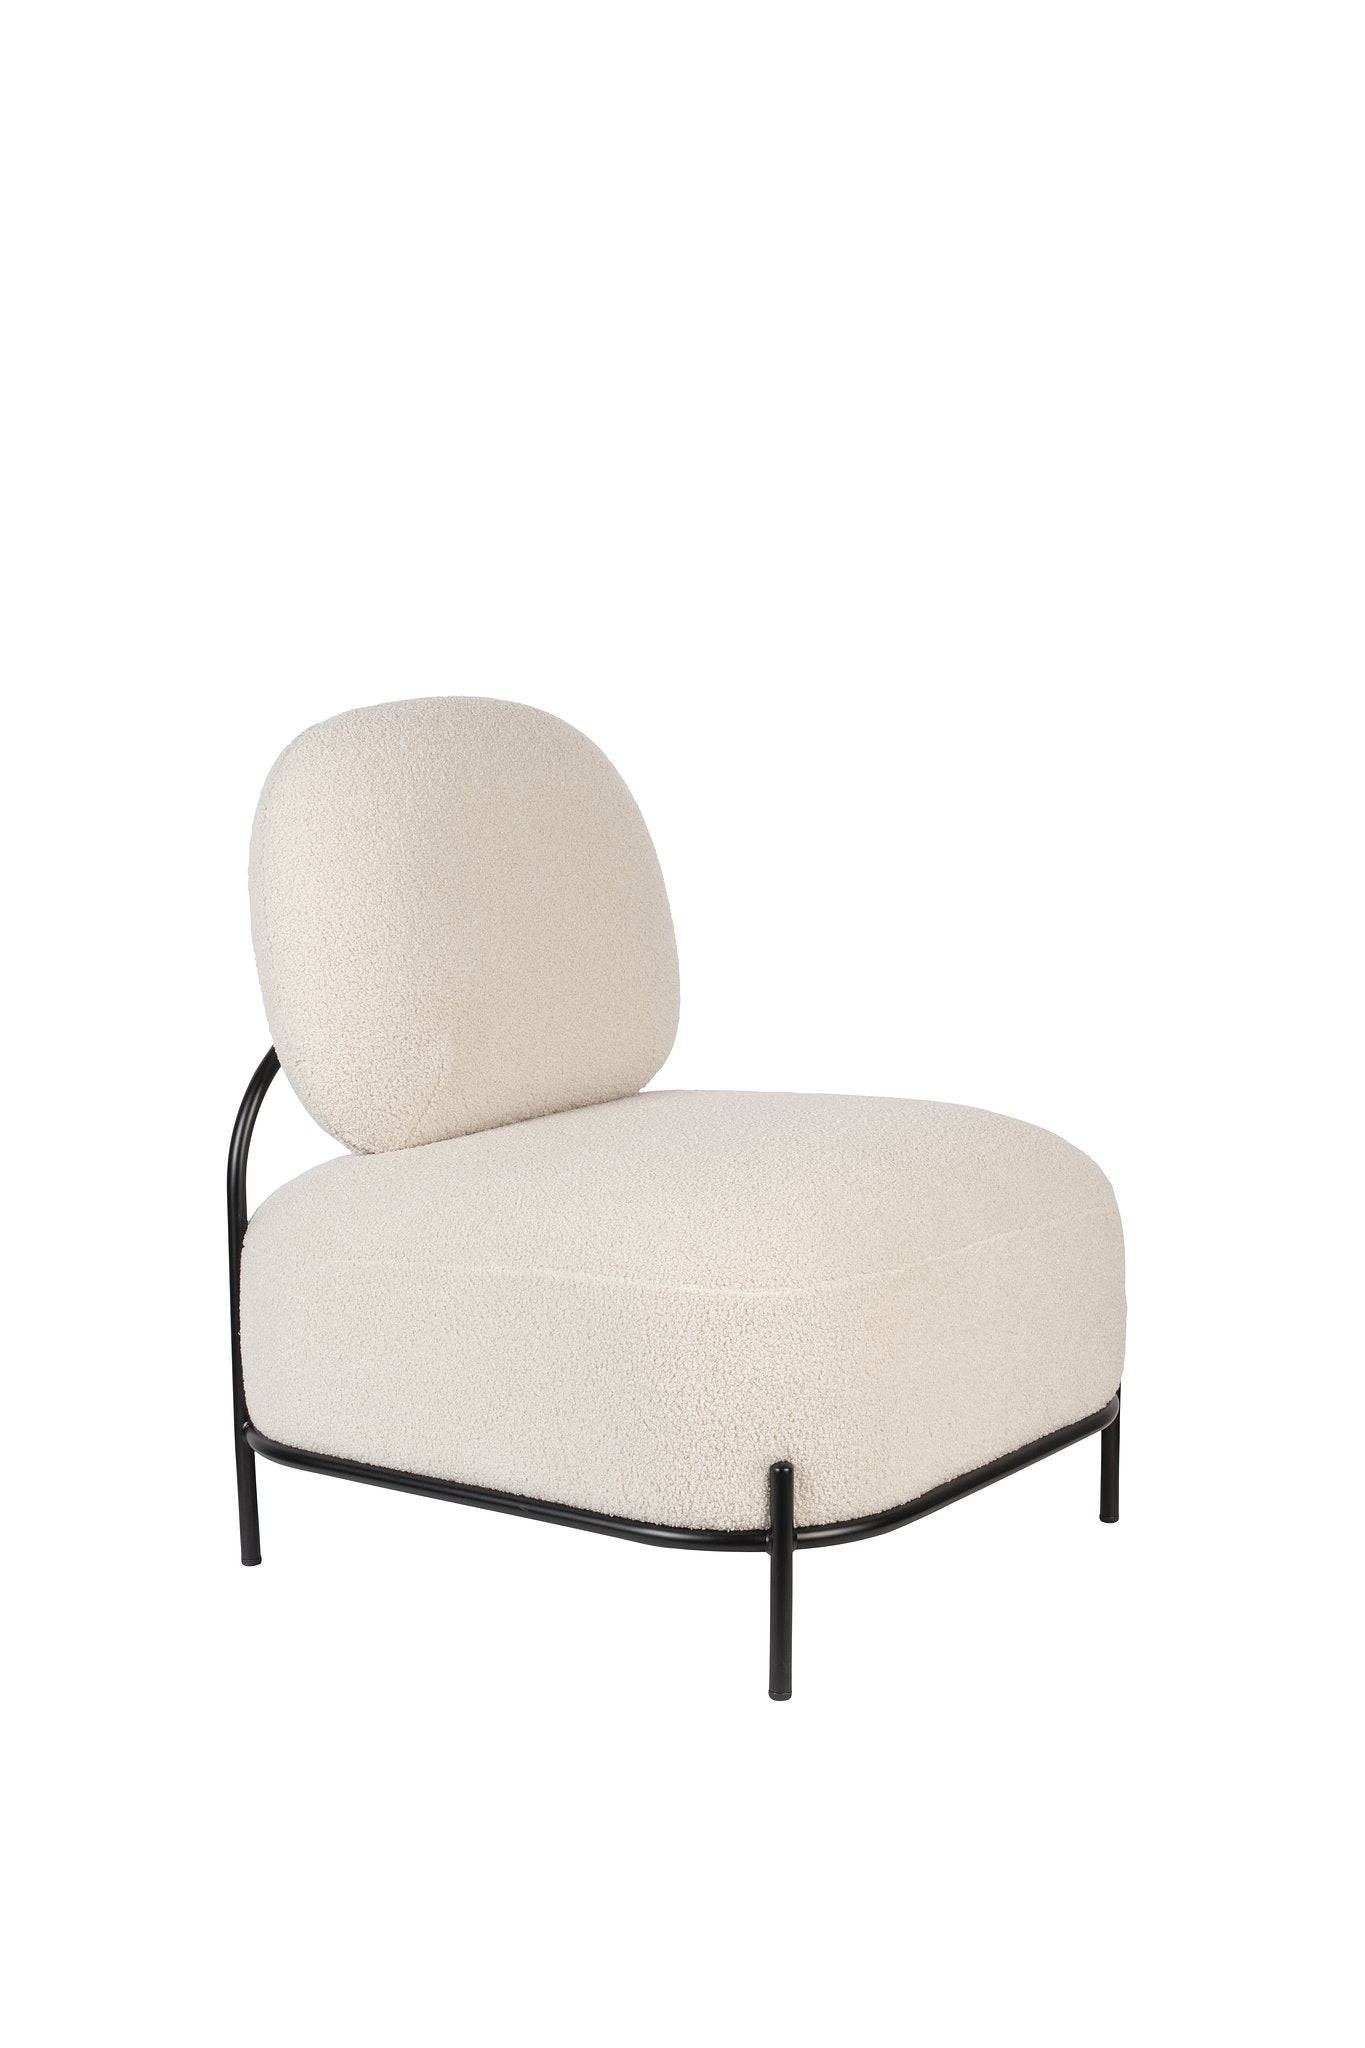 ANLI STYLE Lounge Chair Polly Teddy Ivory